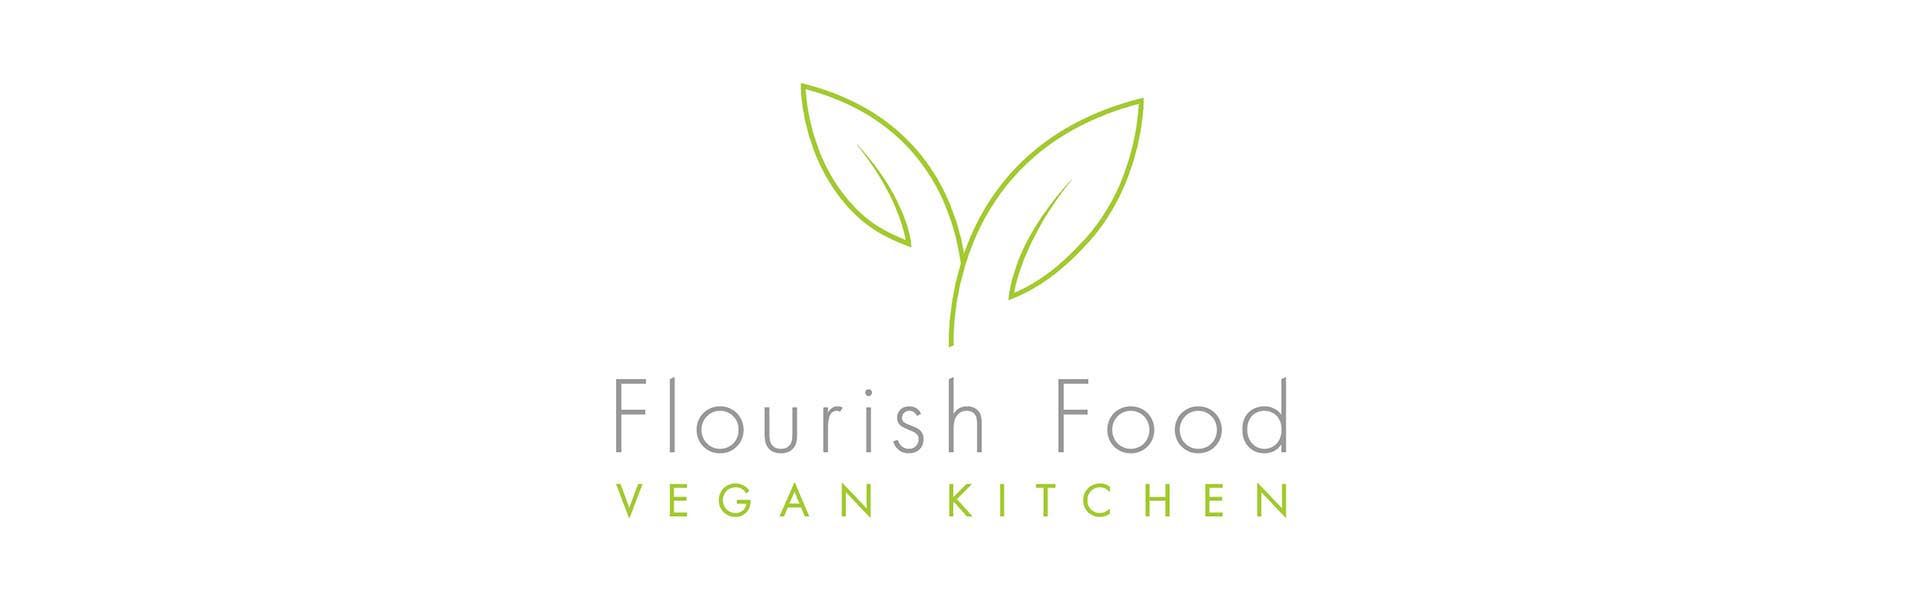 a logo for flourish food vegan kitchen with two green leaves